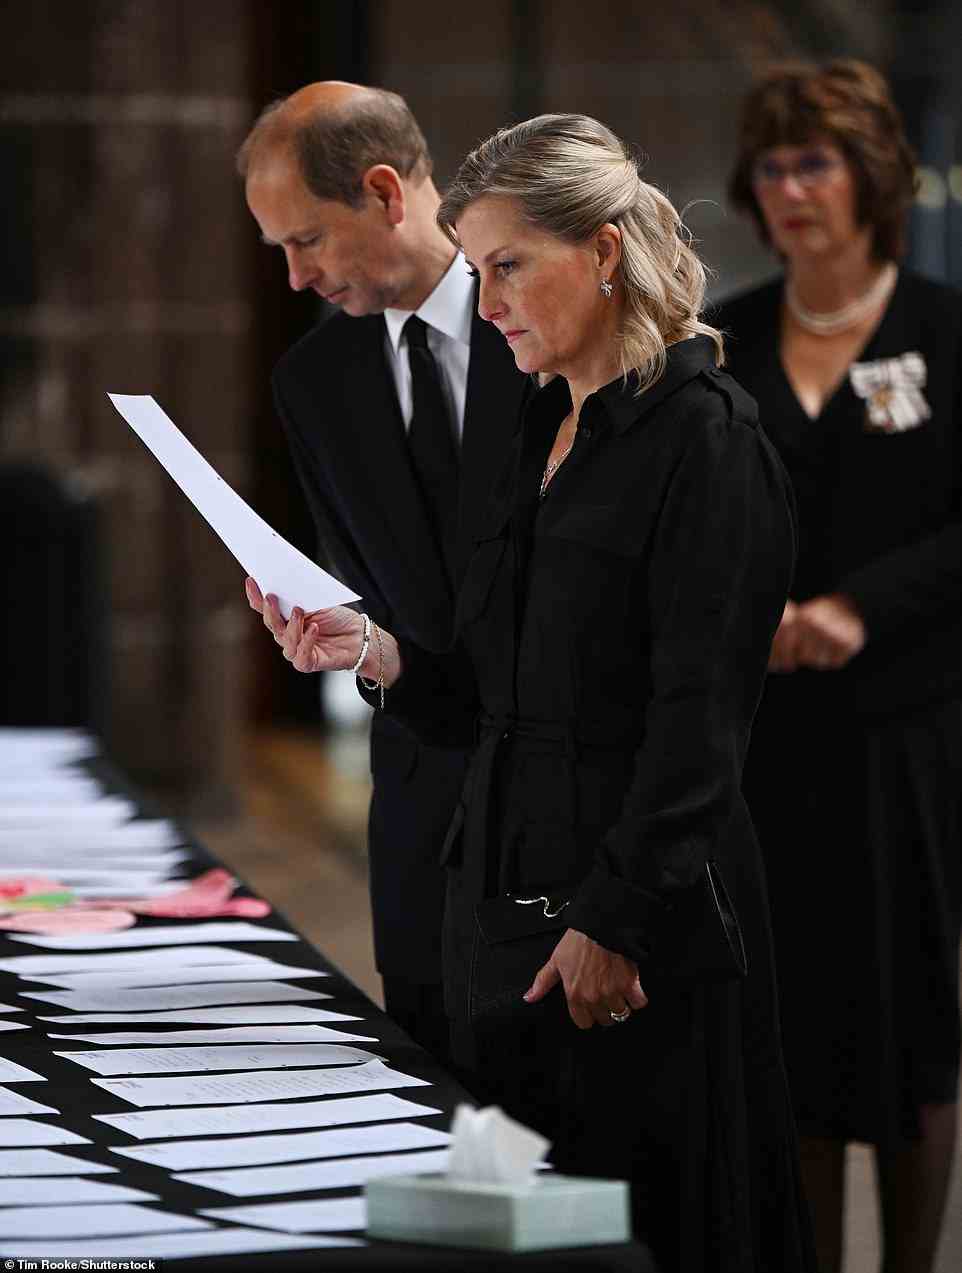 They were also shown photographs of the Queen's last visit to the cathedral, to mark the 600th anniversary celebration of the collegiate church in July 2021